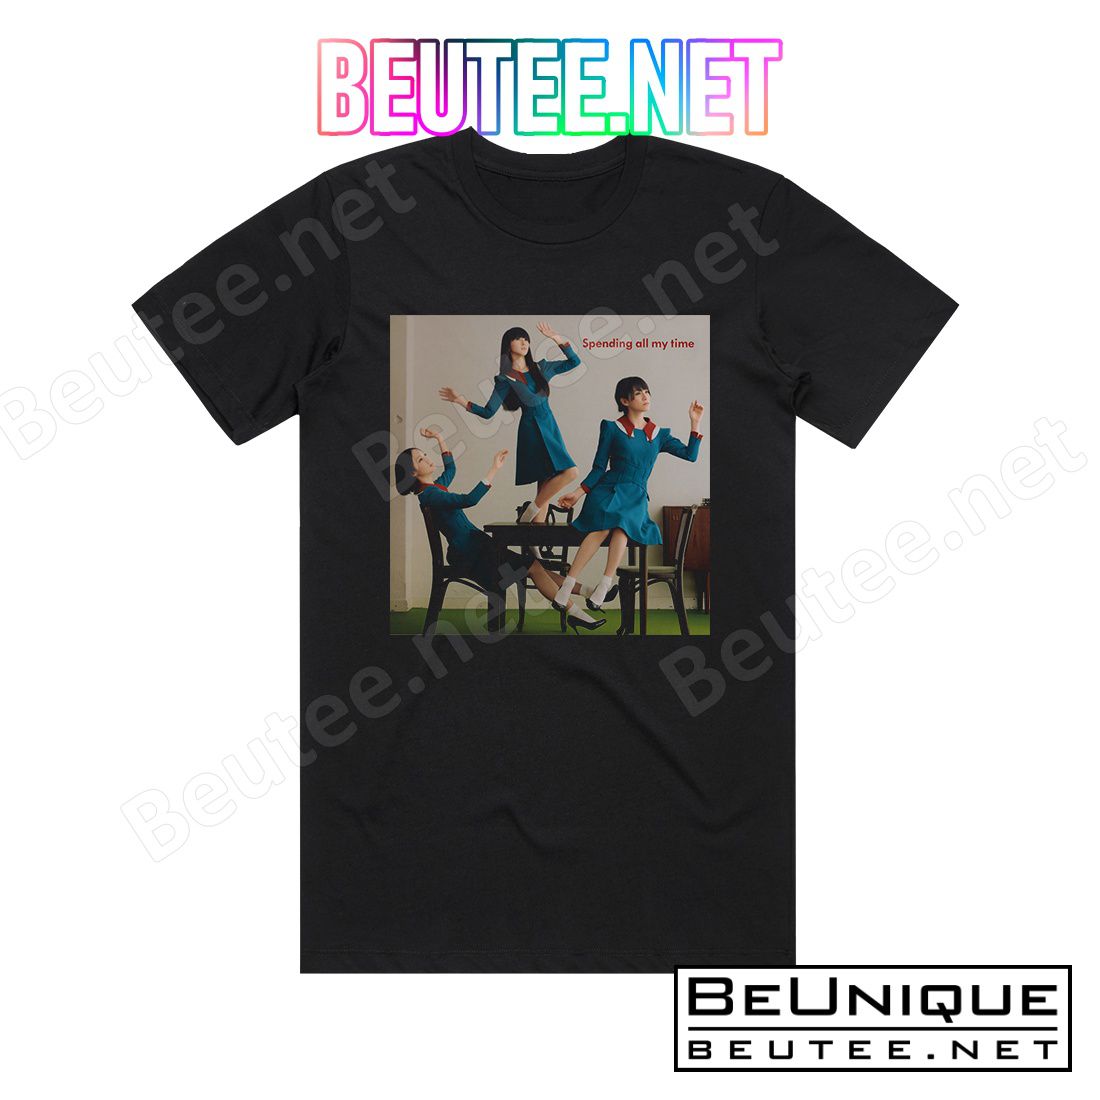 Perfume Spending All My Time 1 Album Cover T-Shirt